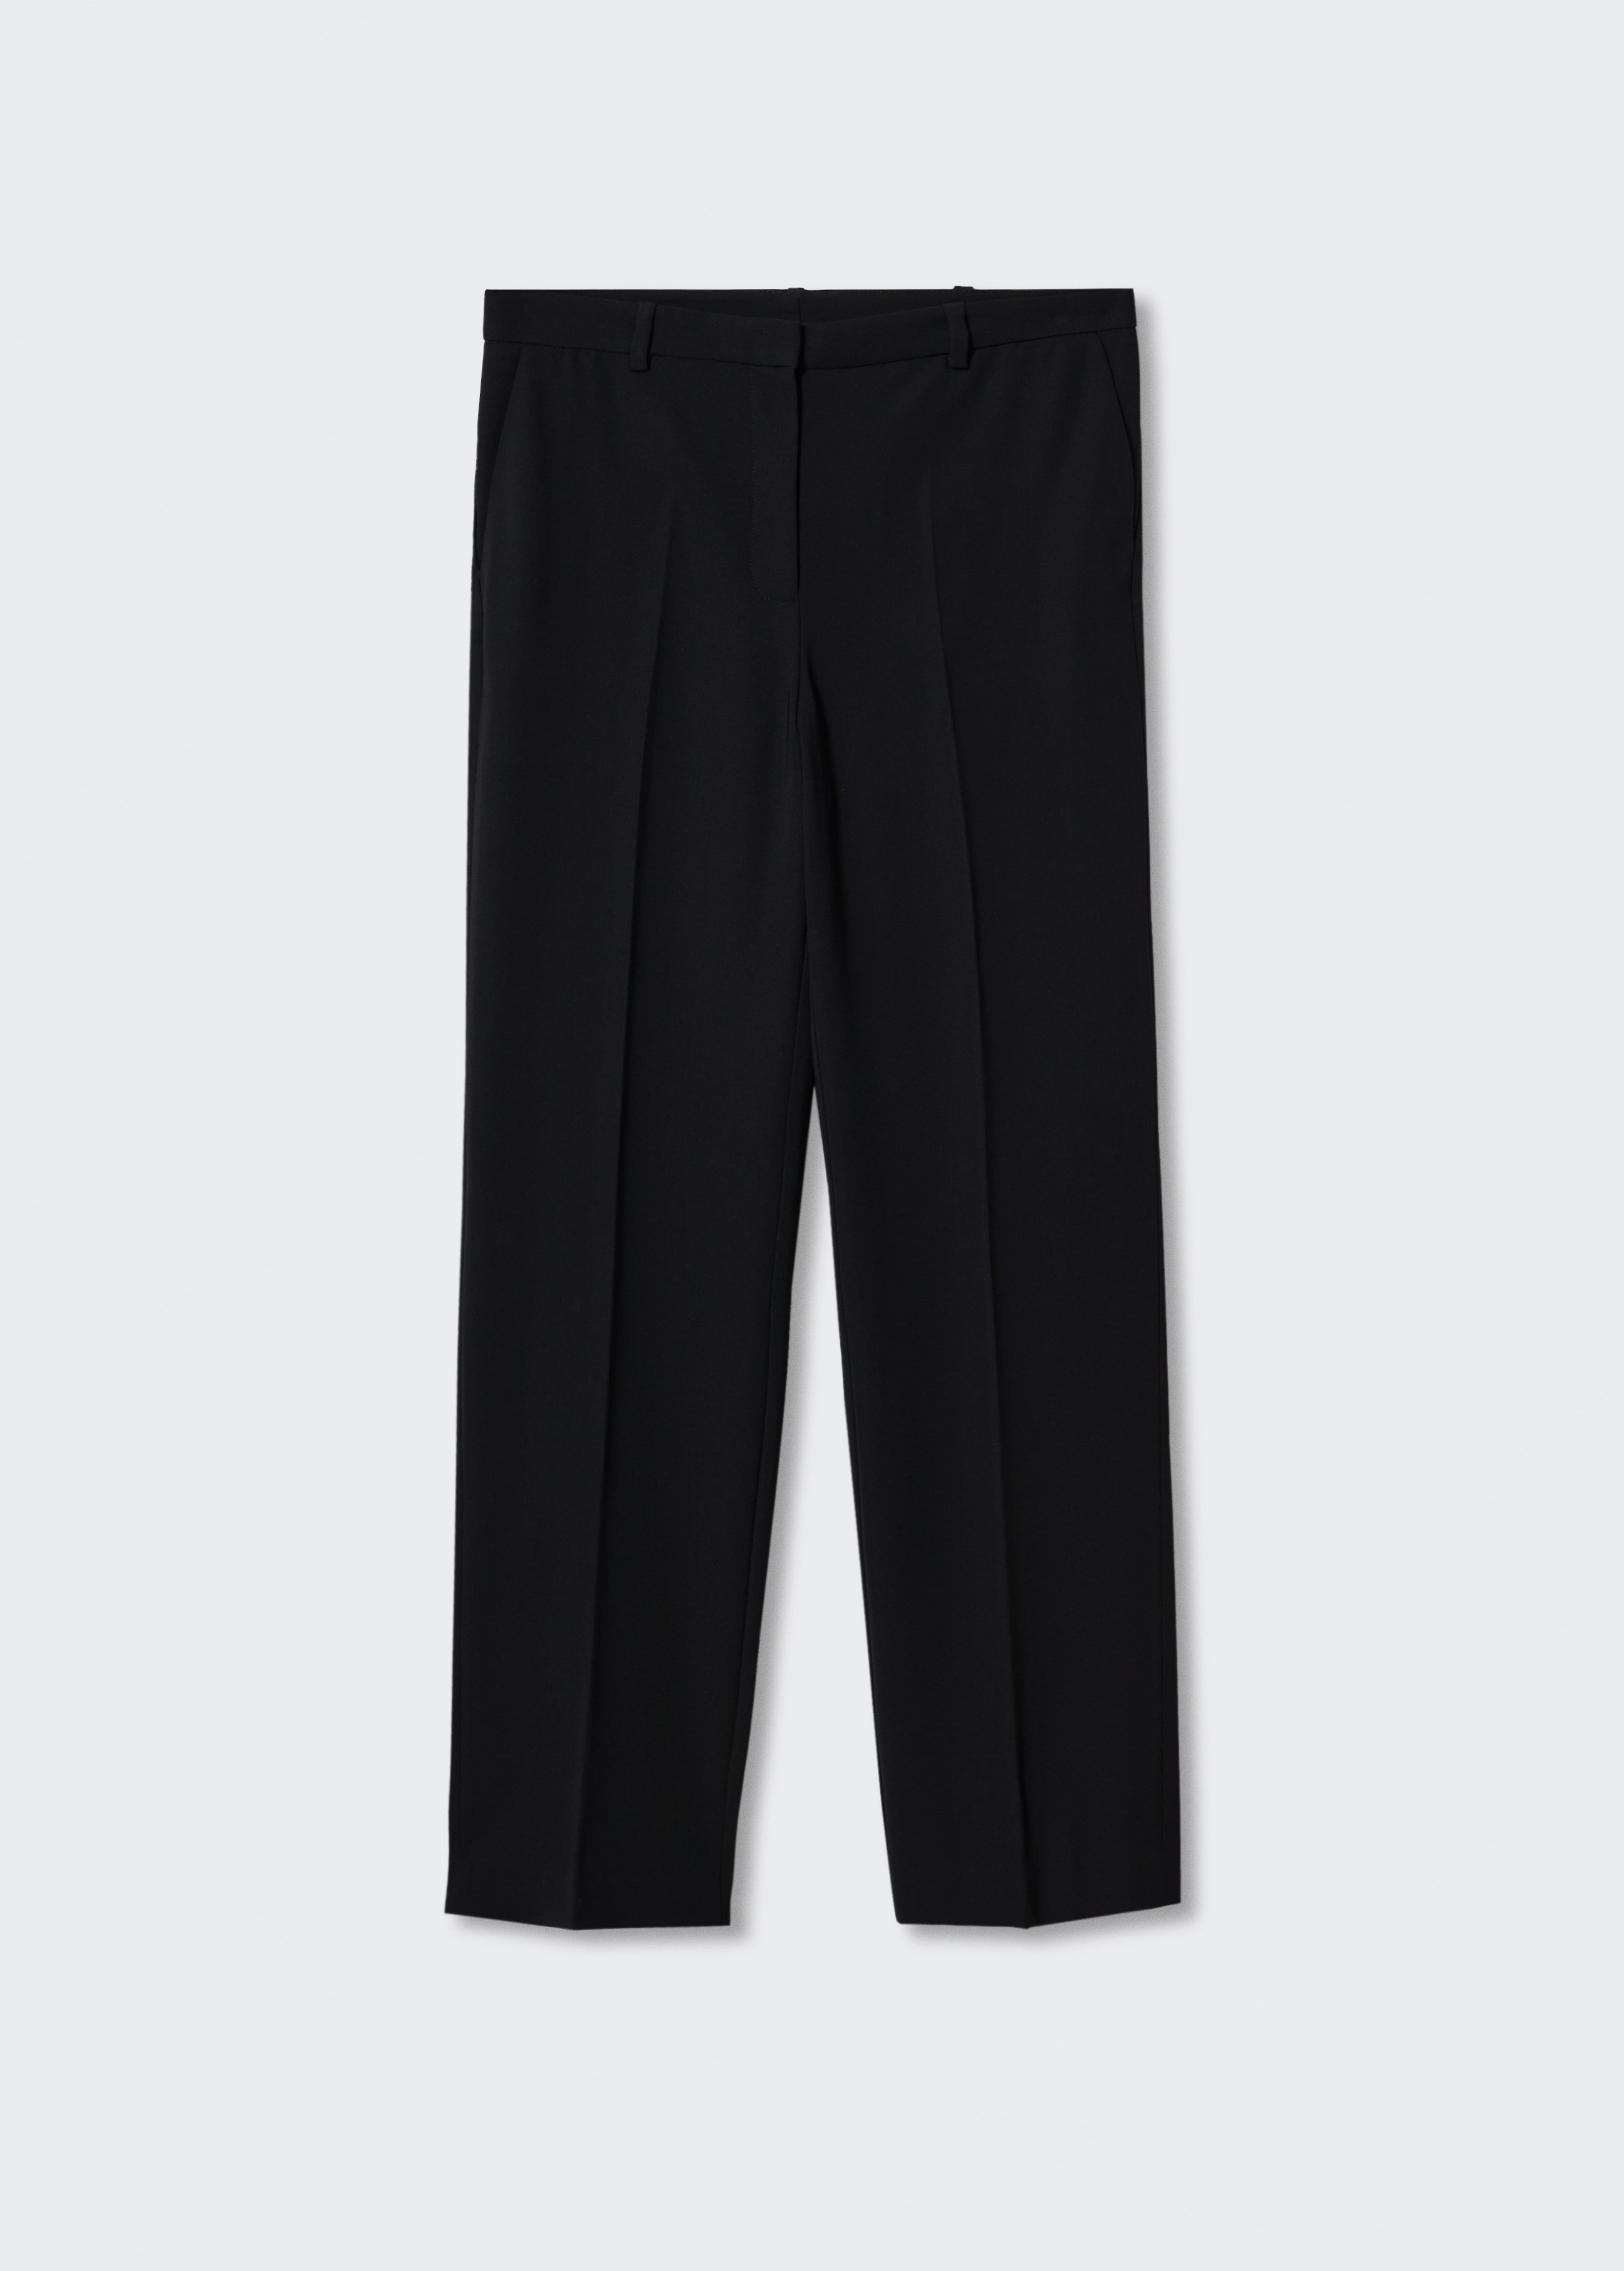 Straight suit pants - Article without model